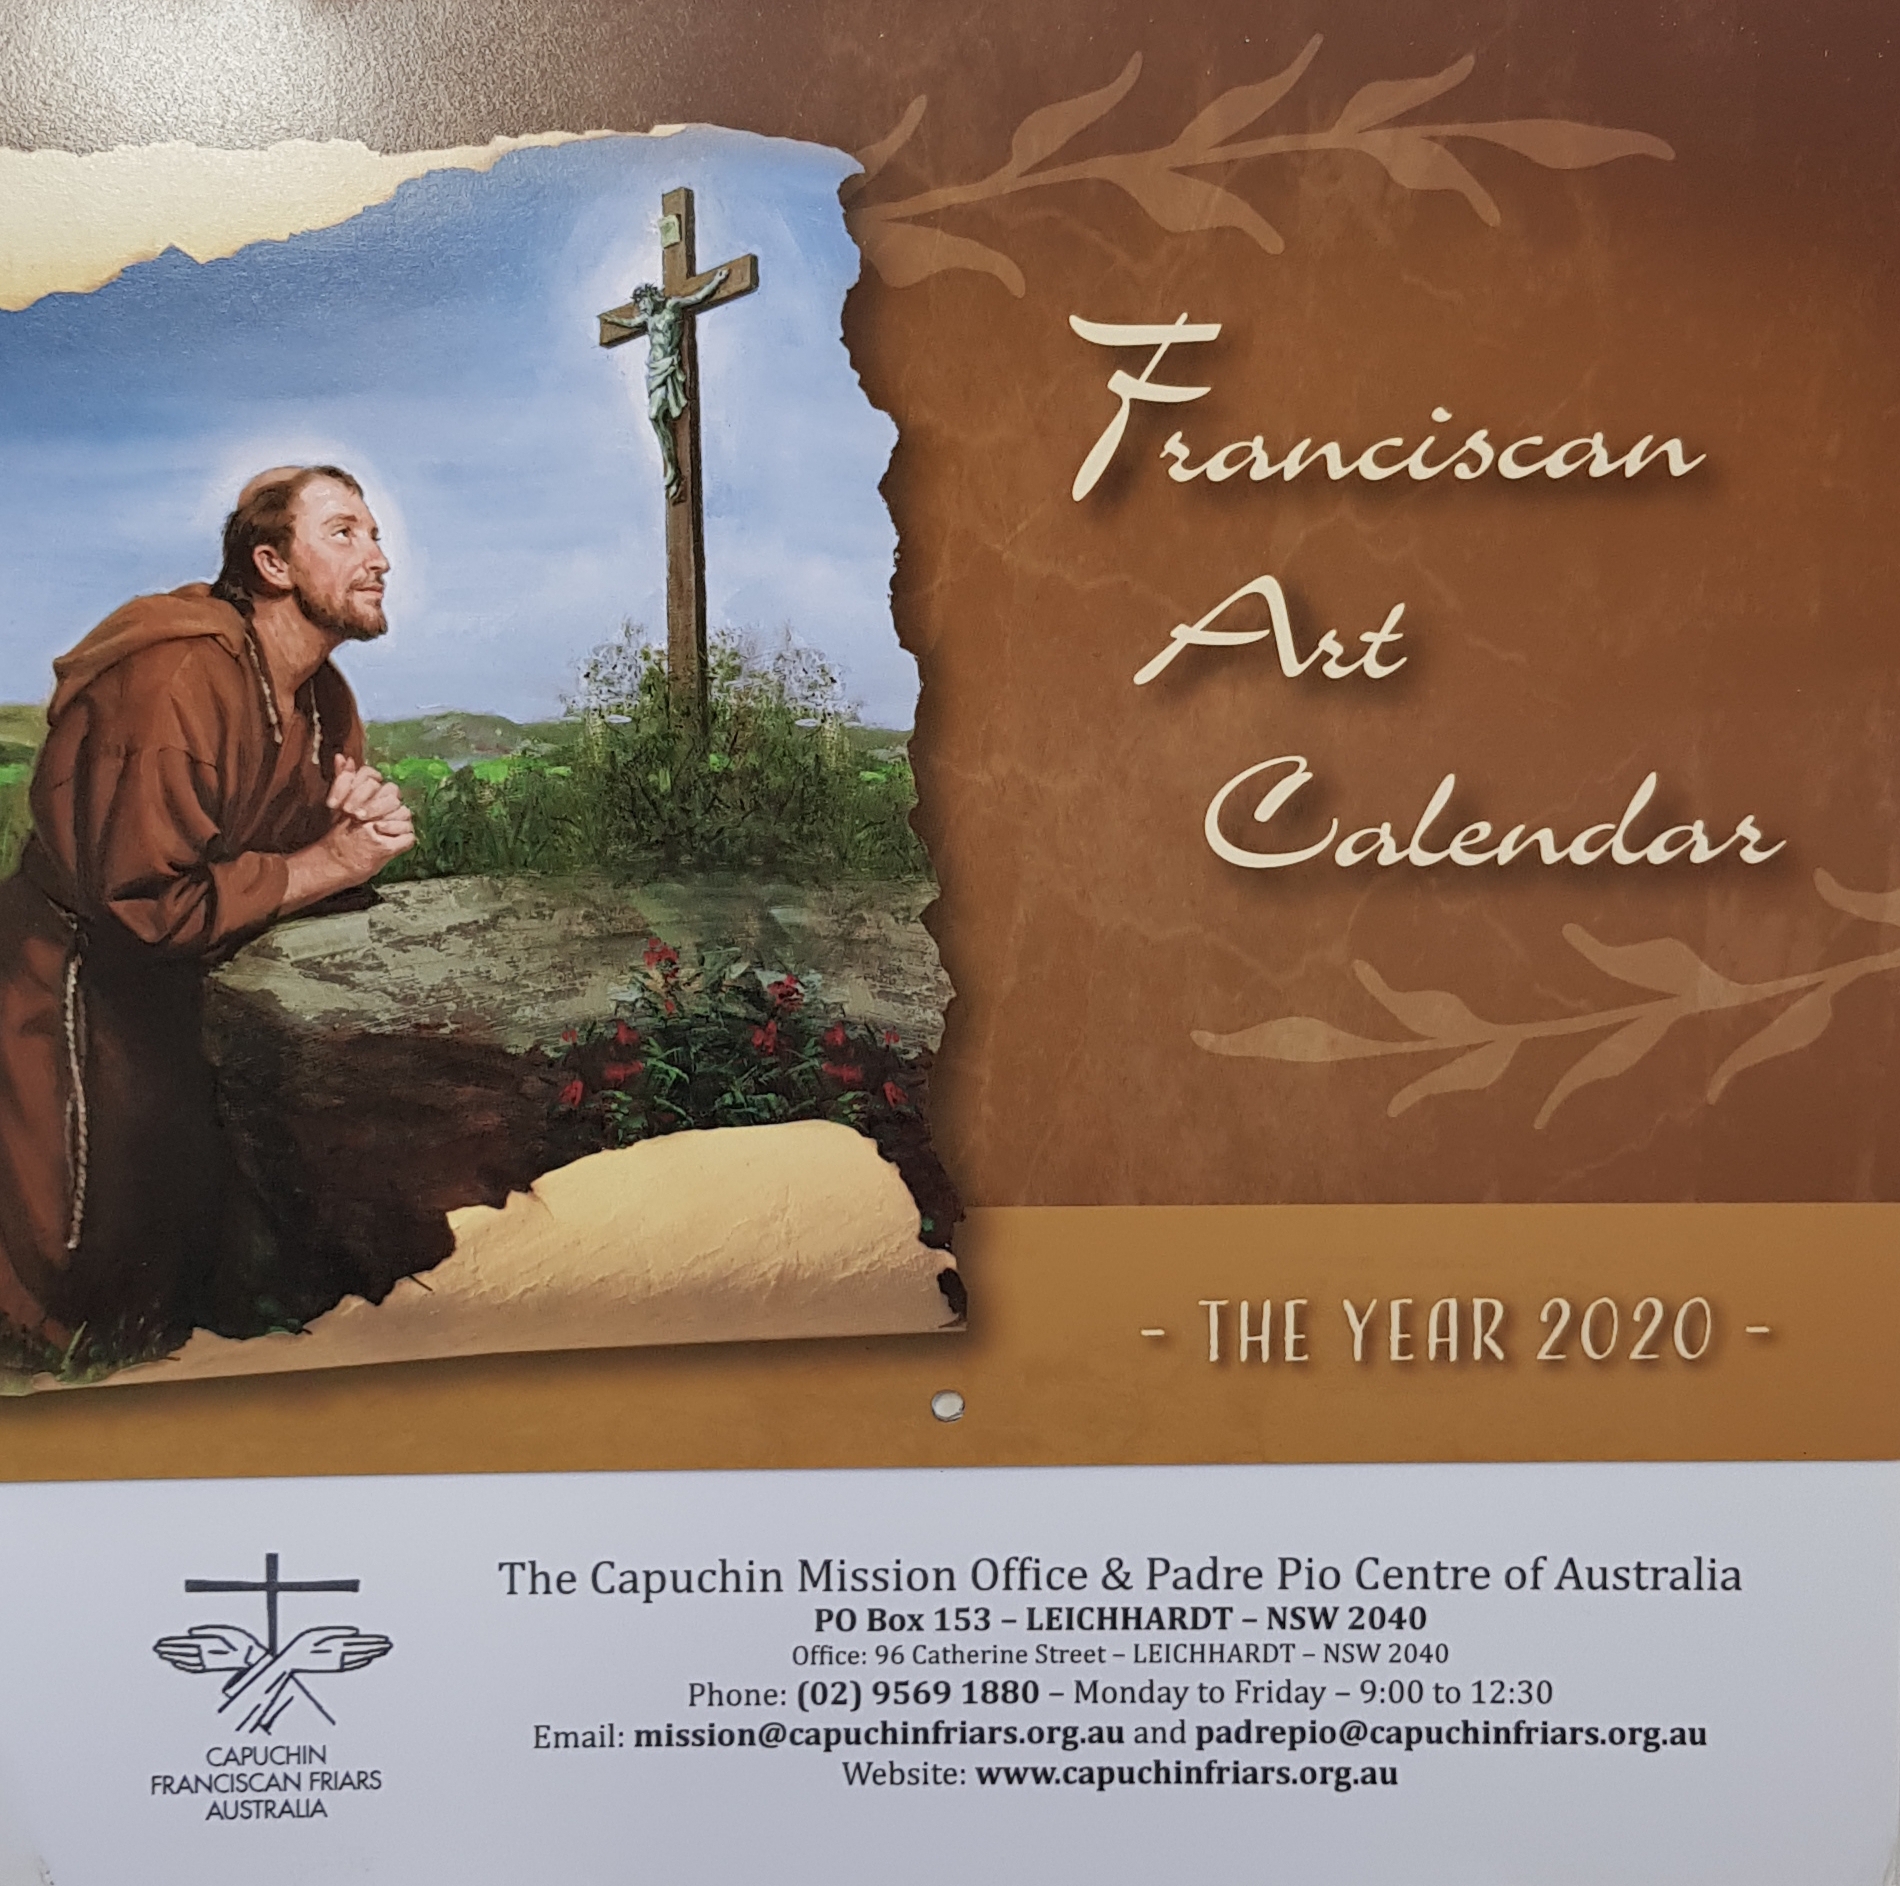 st-francis-calendar-the-capuchin-mission-office